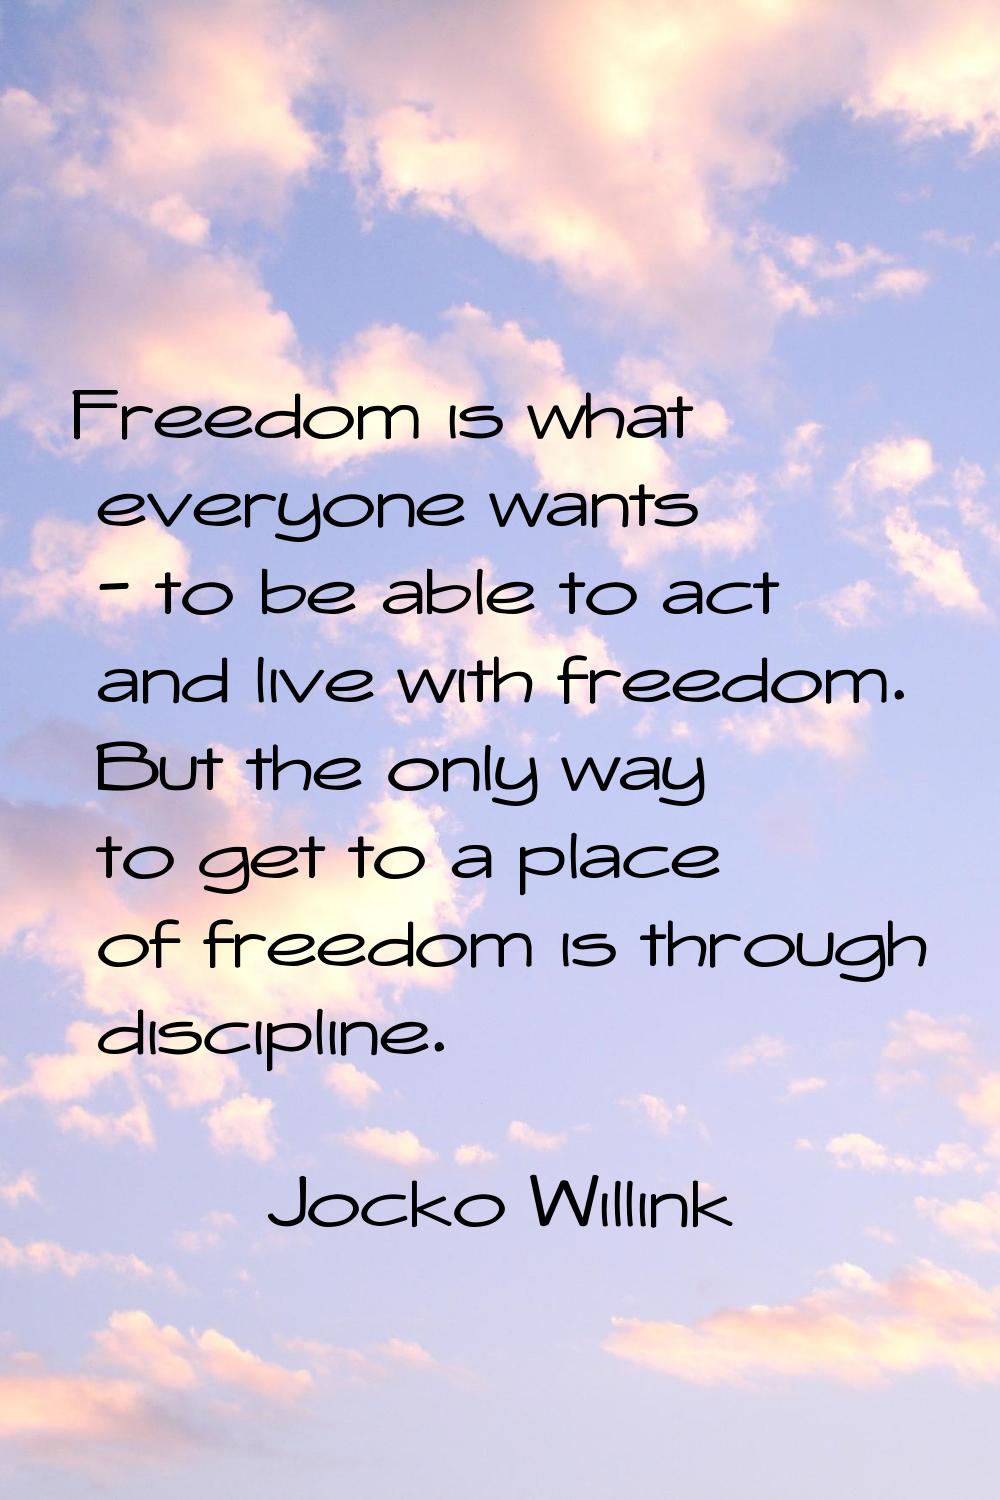 Freedom is what everyone wants - to be able to act and live with freedom. But the only way to get t